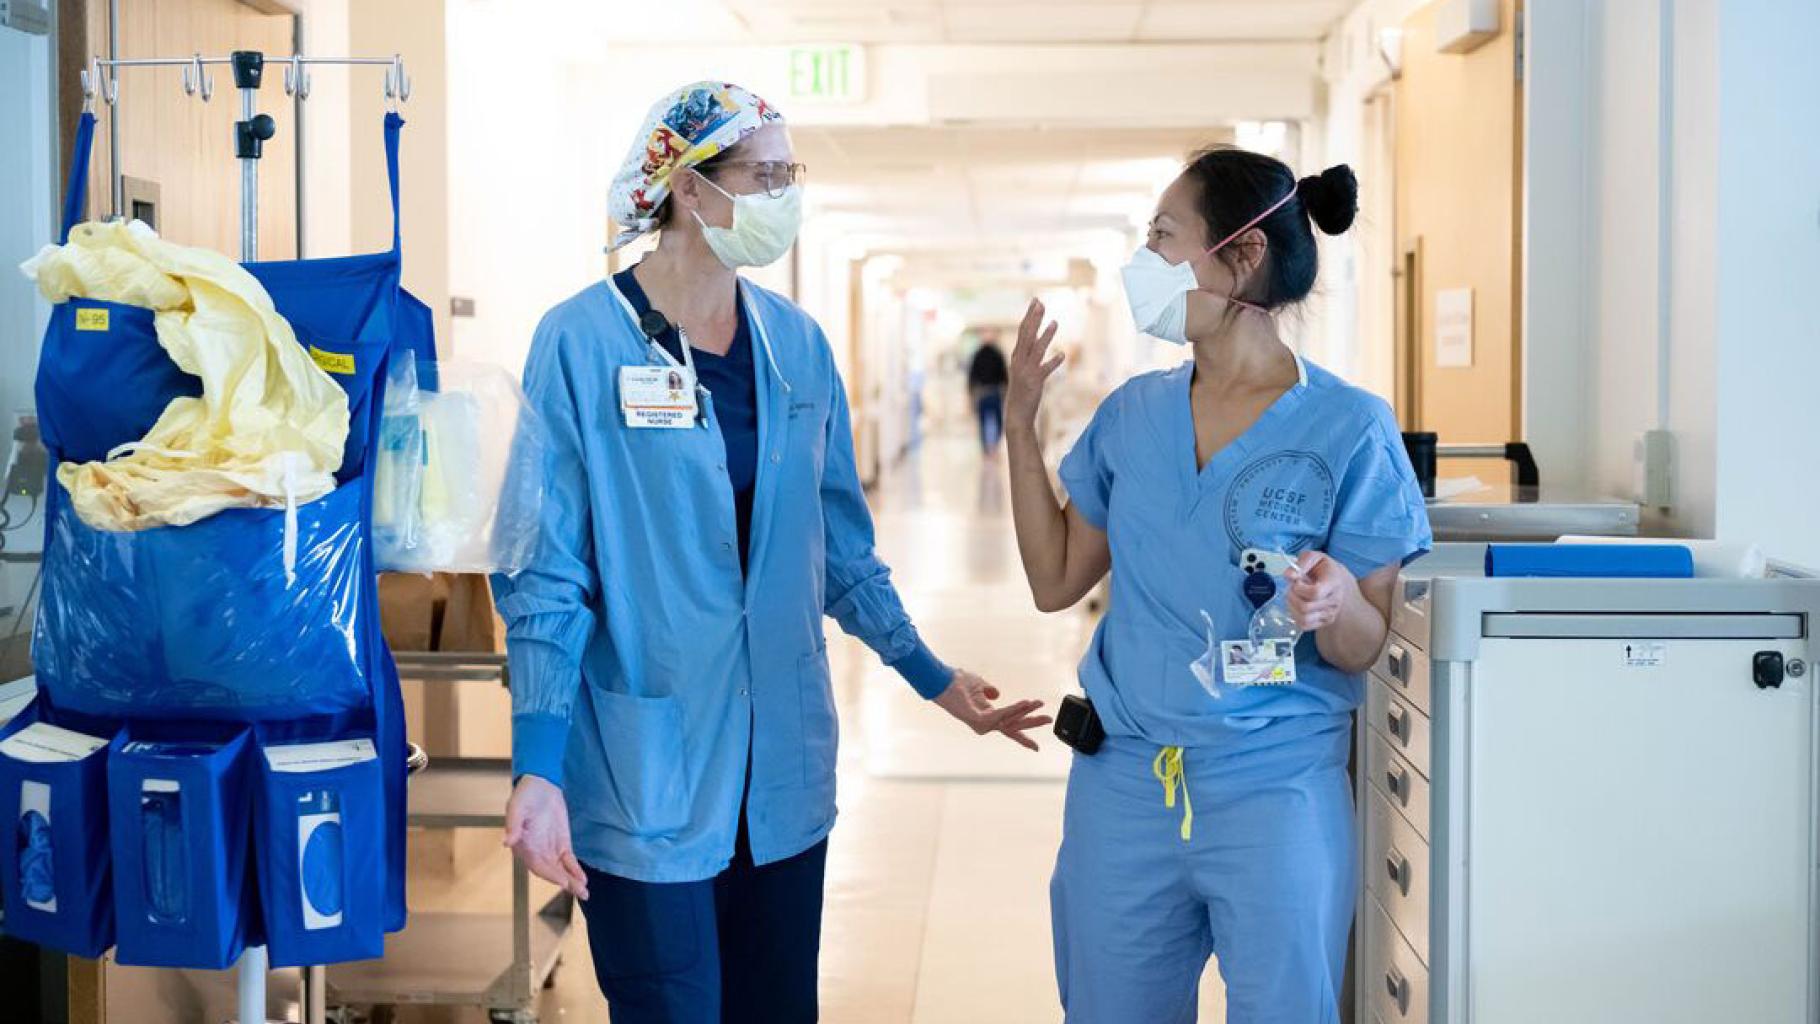 Two Health employees chat in the hallway